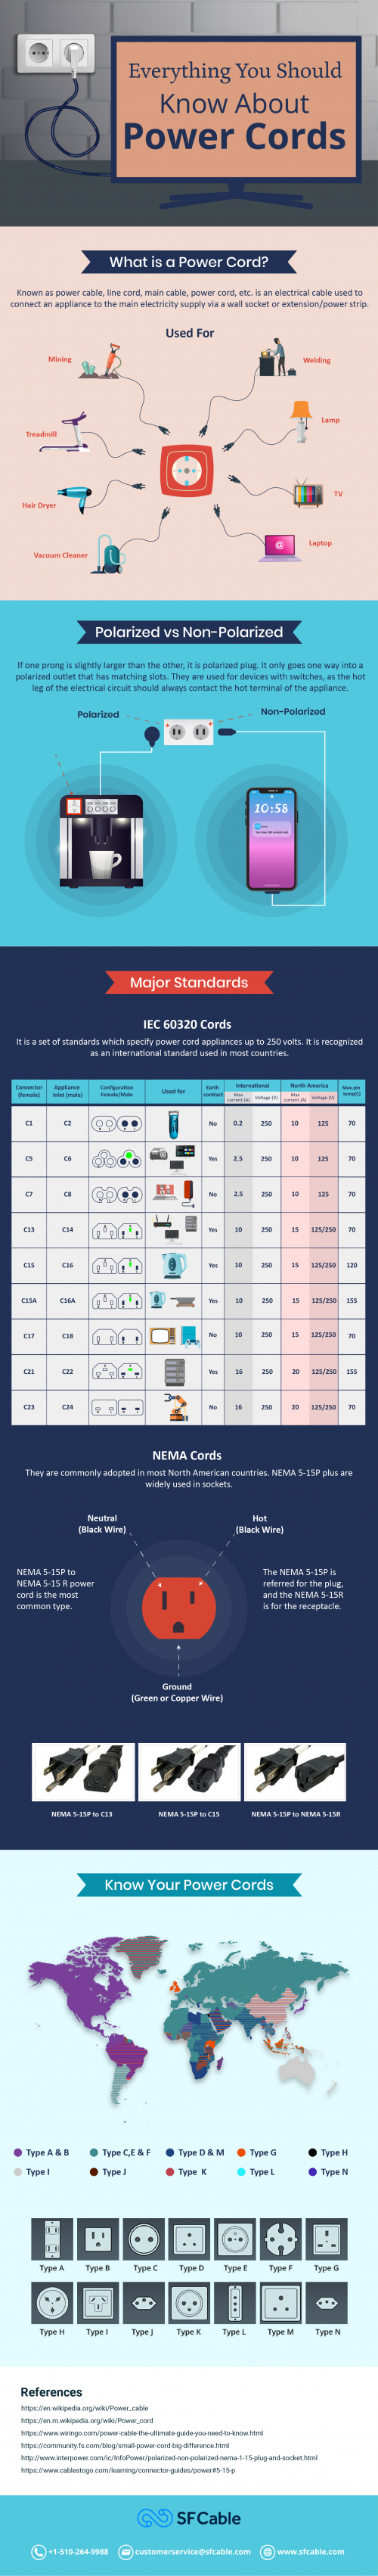 When you have so many options to choose your power cords, it can be overwhelming sometimes. While you are looking to buy it for a particular application, it is important to have a basic understanding. This infographic will give you a 360 view of power cords and its applications. Looking to buy a suitable power cord? Here is all you need to know.https://www.sfcable.com/blog/everything-know-power-cords-infographic/